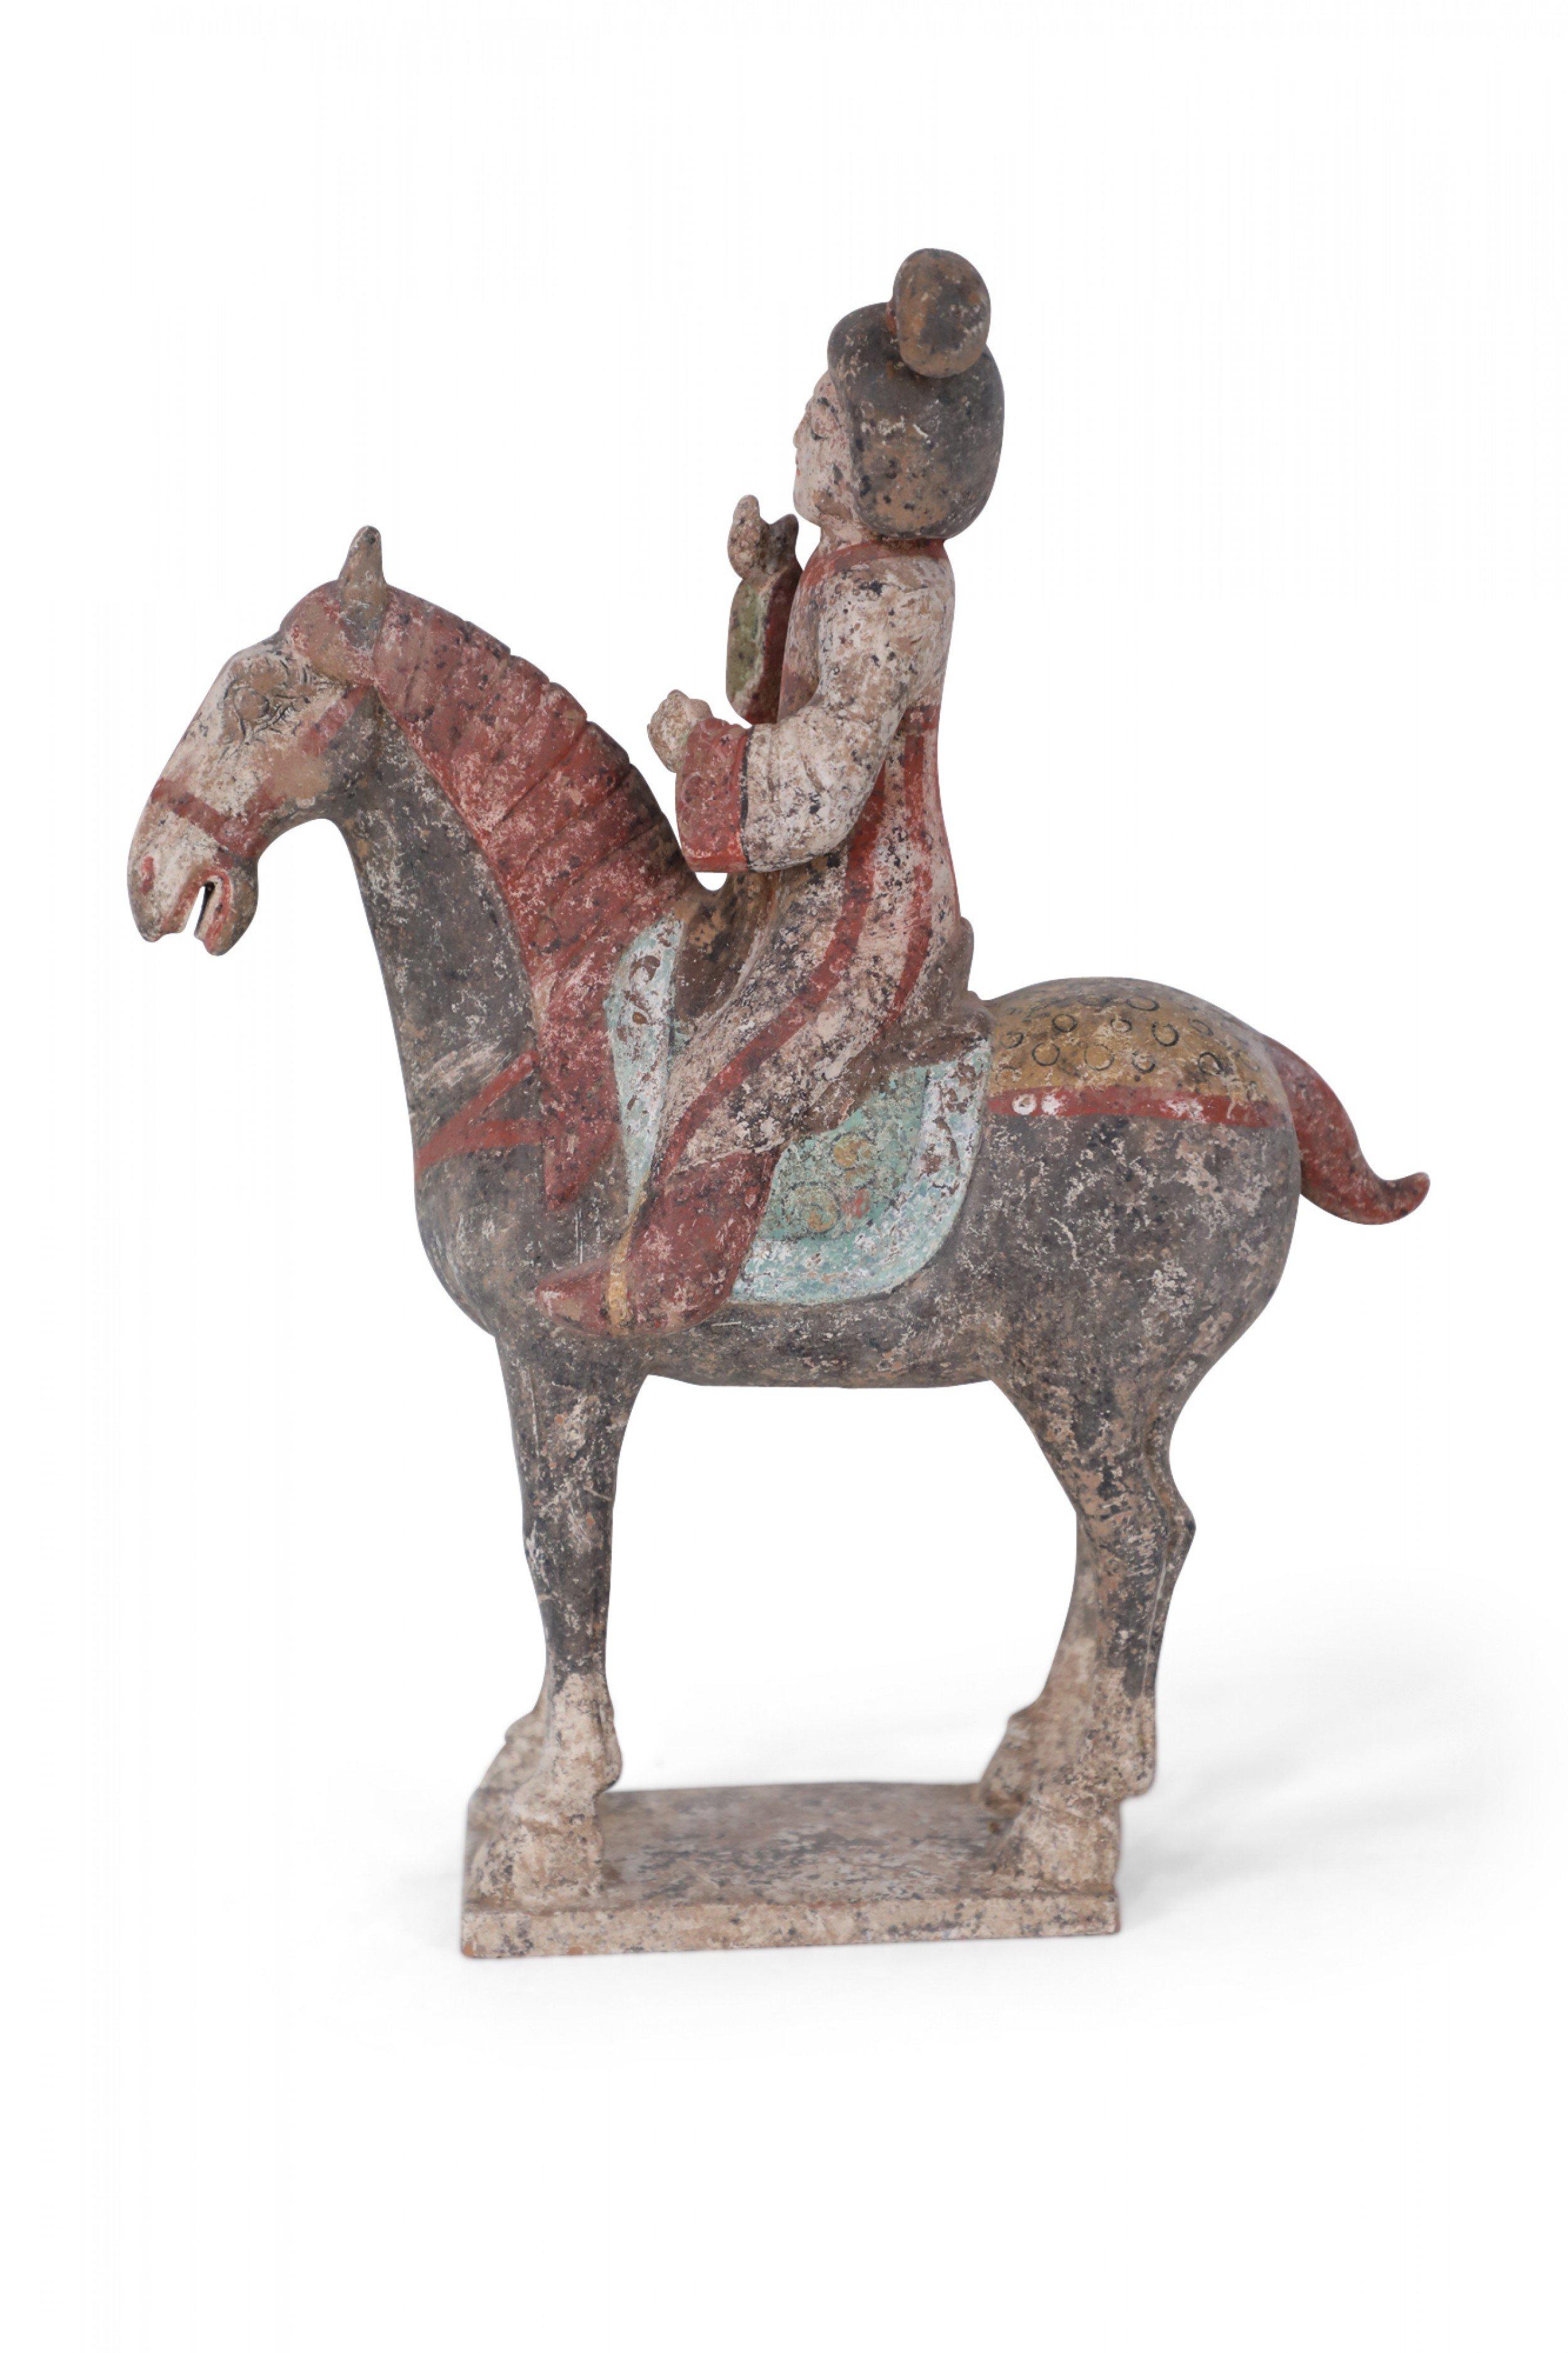 Antique Chinese Tang Dynasty-style terra cotta tomb figure of a woman dressed in gray and red robes sitting atop a blue and green saddle, on a horse that is standing on a square base.
       